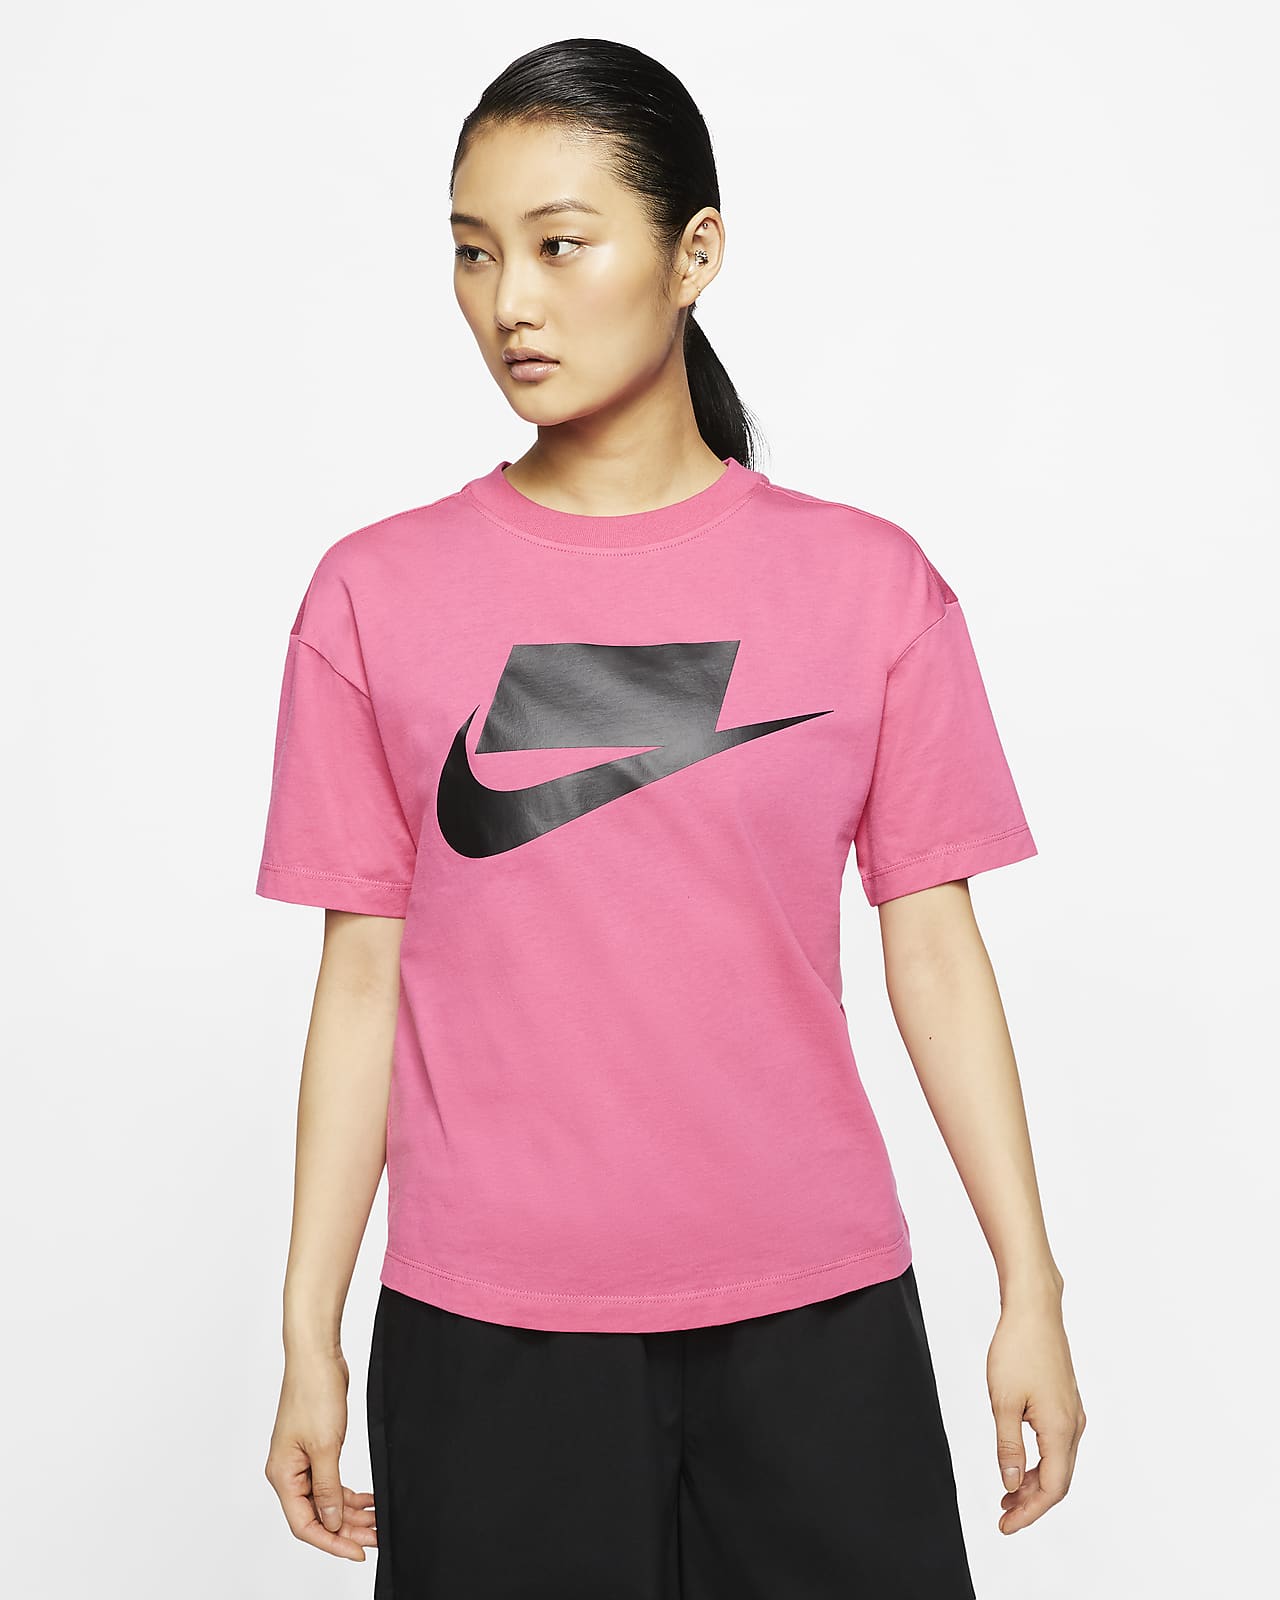 nike womans top